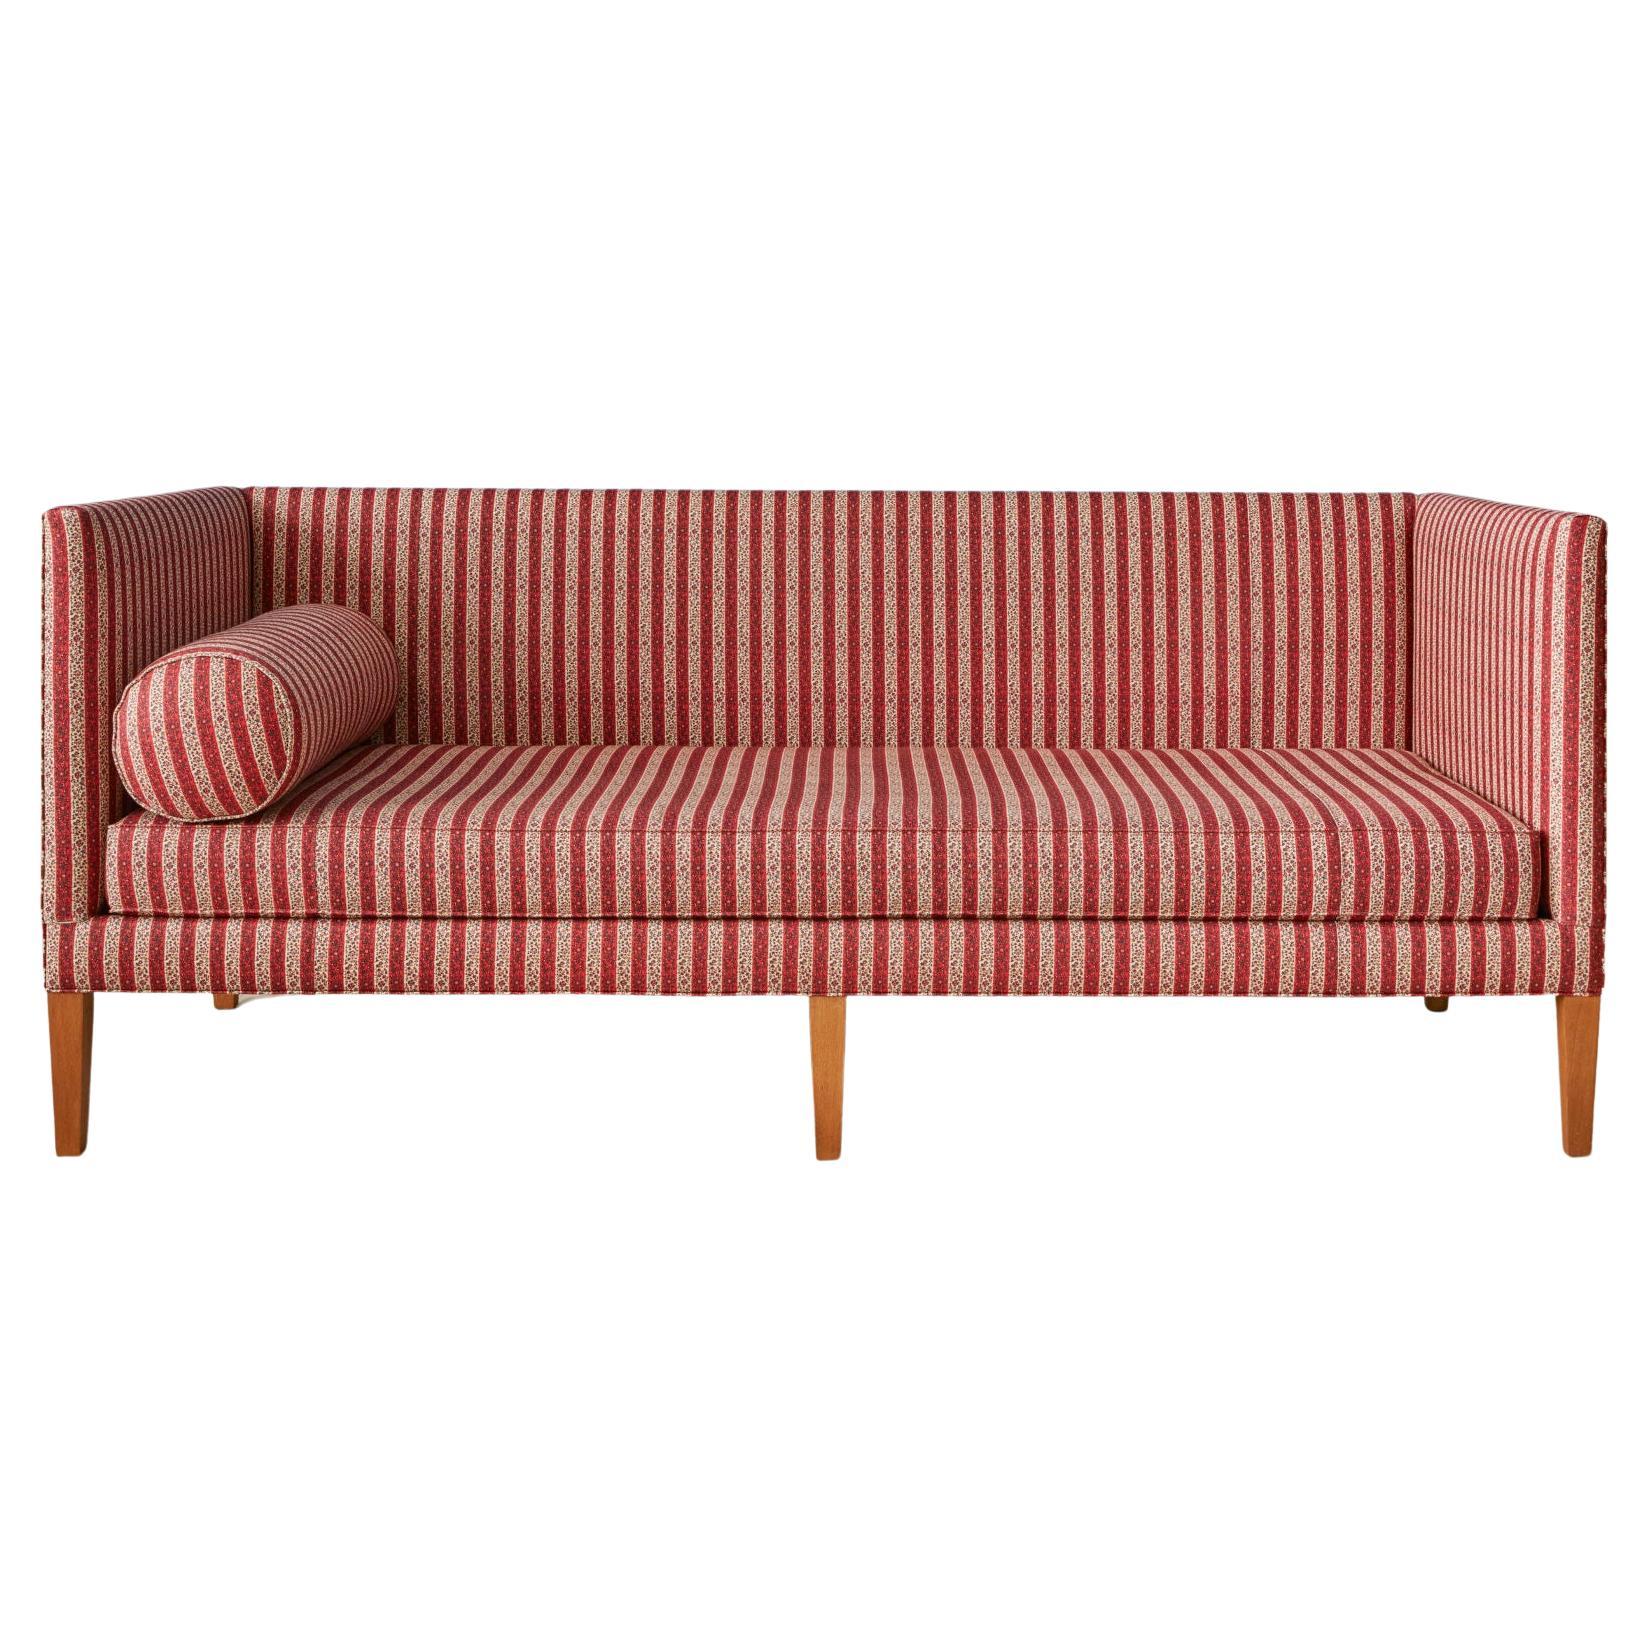 Contemporary Sofa in Customized Striped Red Upholstery by the Apartment, Belgium For Sale